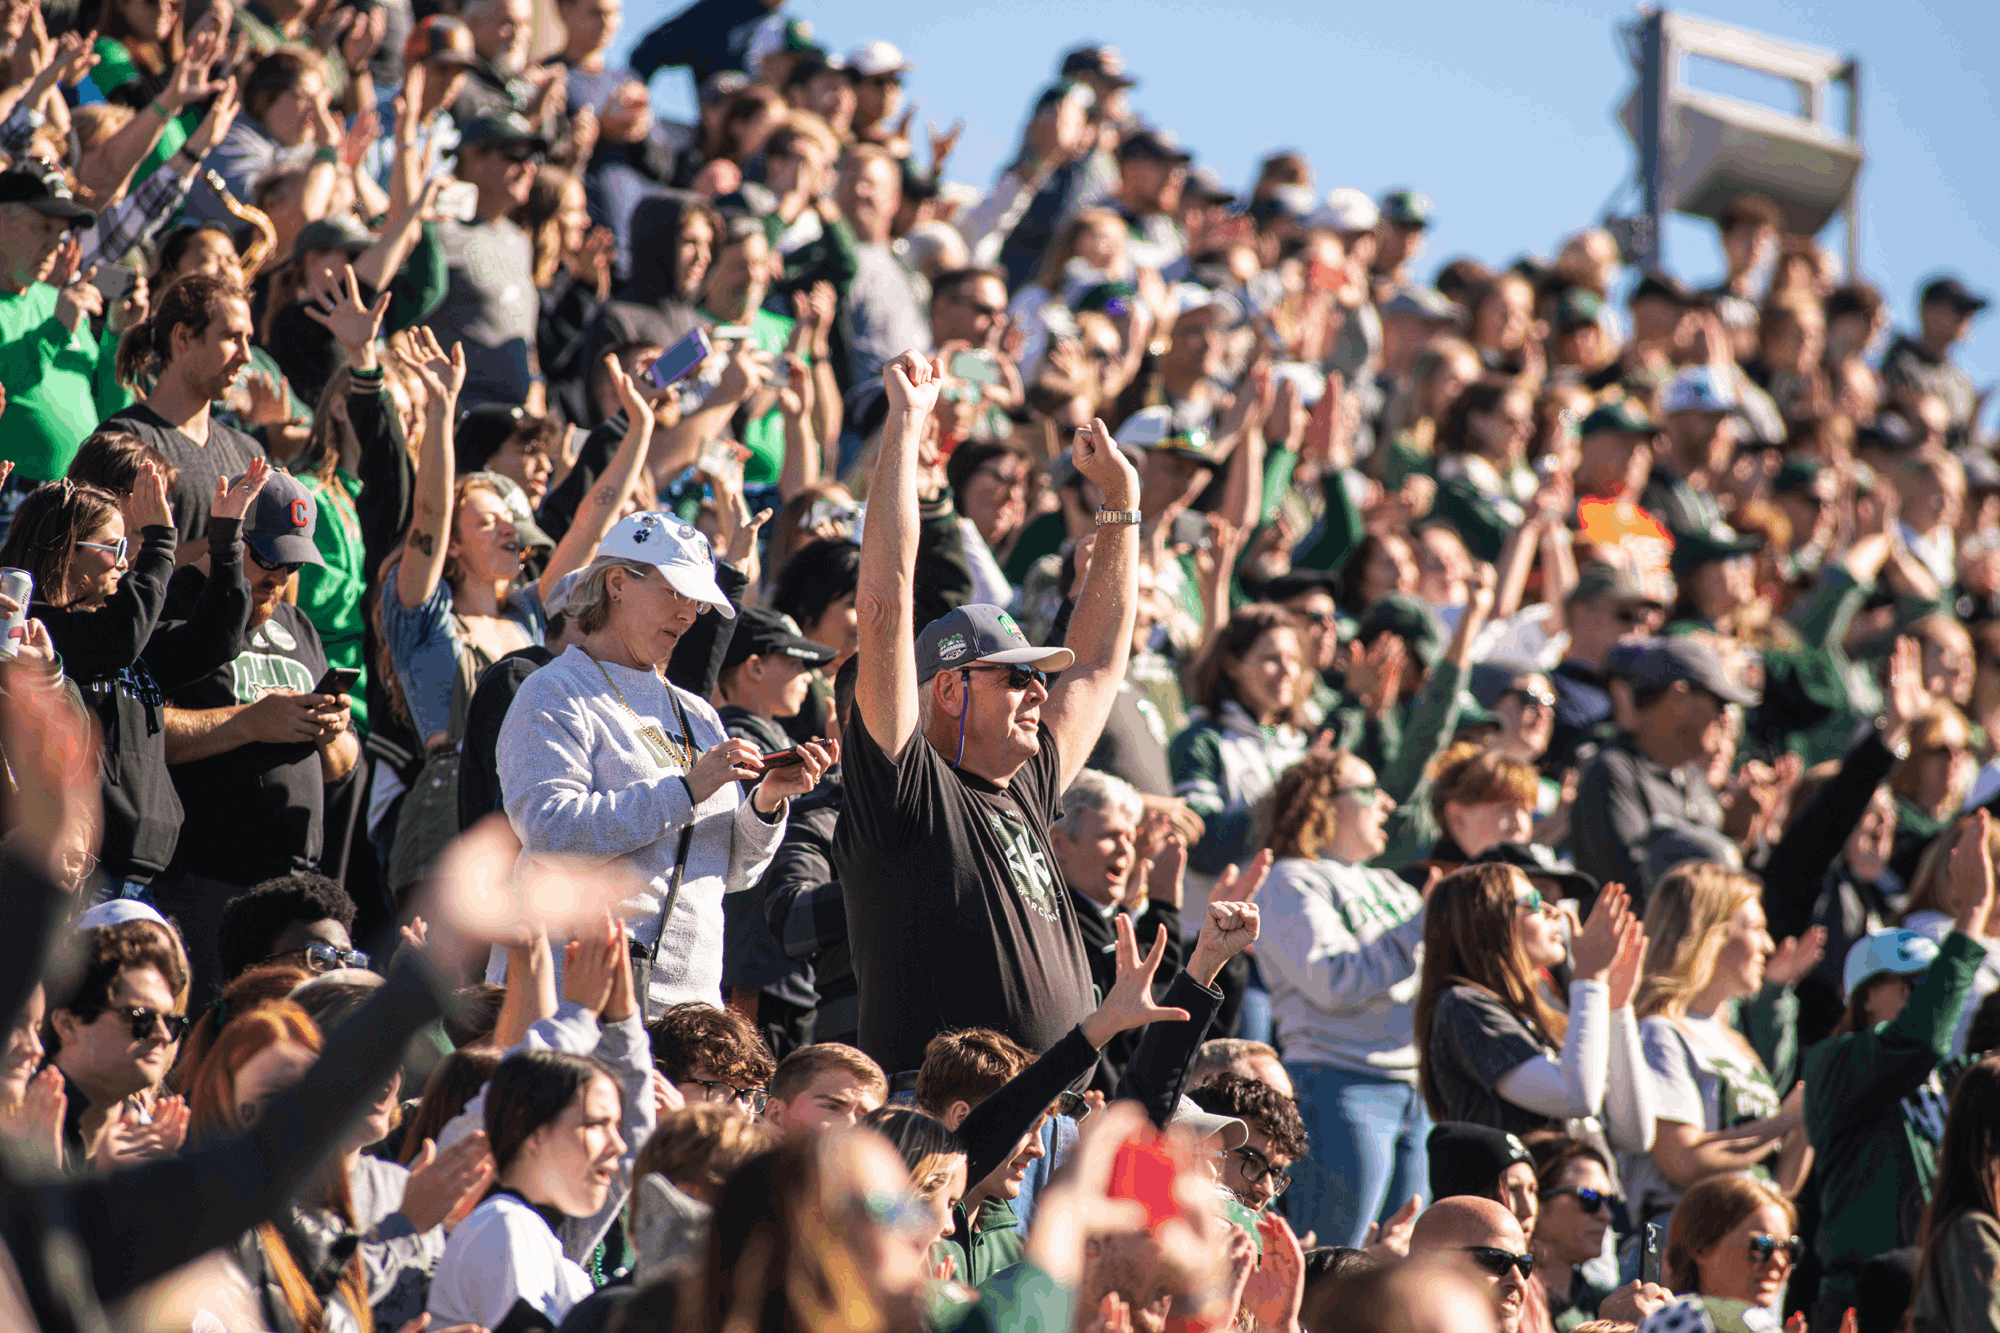 There were plenty of reasons to stand up and cheer at this year’s Homecoming Football Game – from the Bobcats’ winning performance on Frank Solich Field to rousing halftime appearances by the Marching 110 and Alumni Band. 